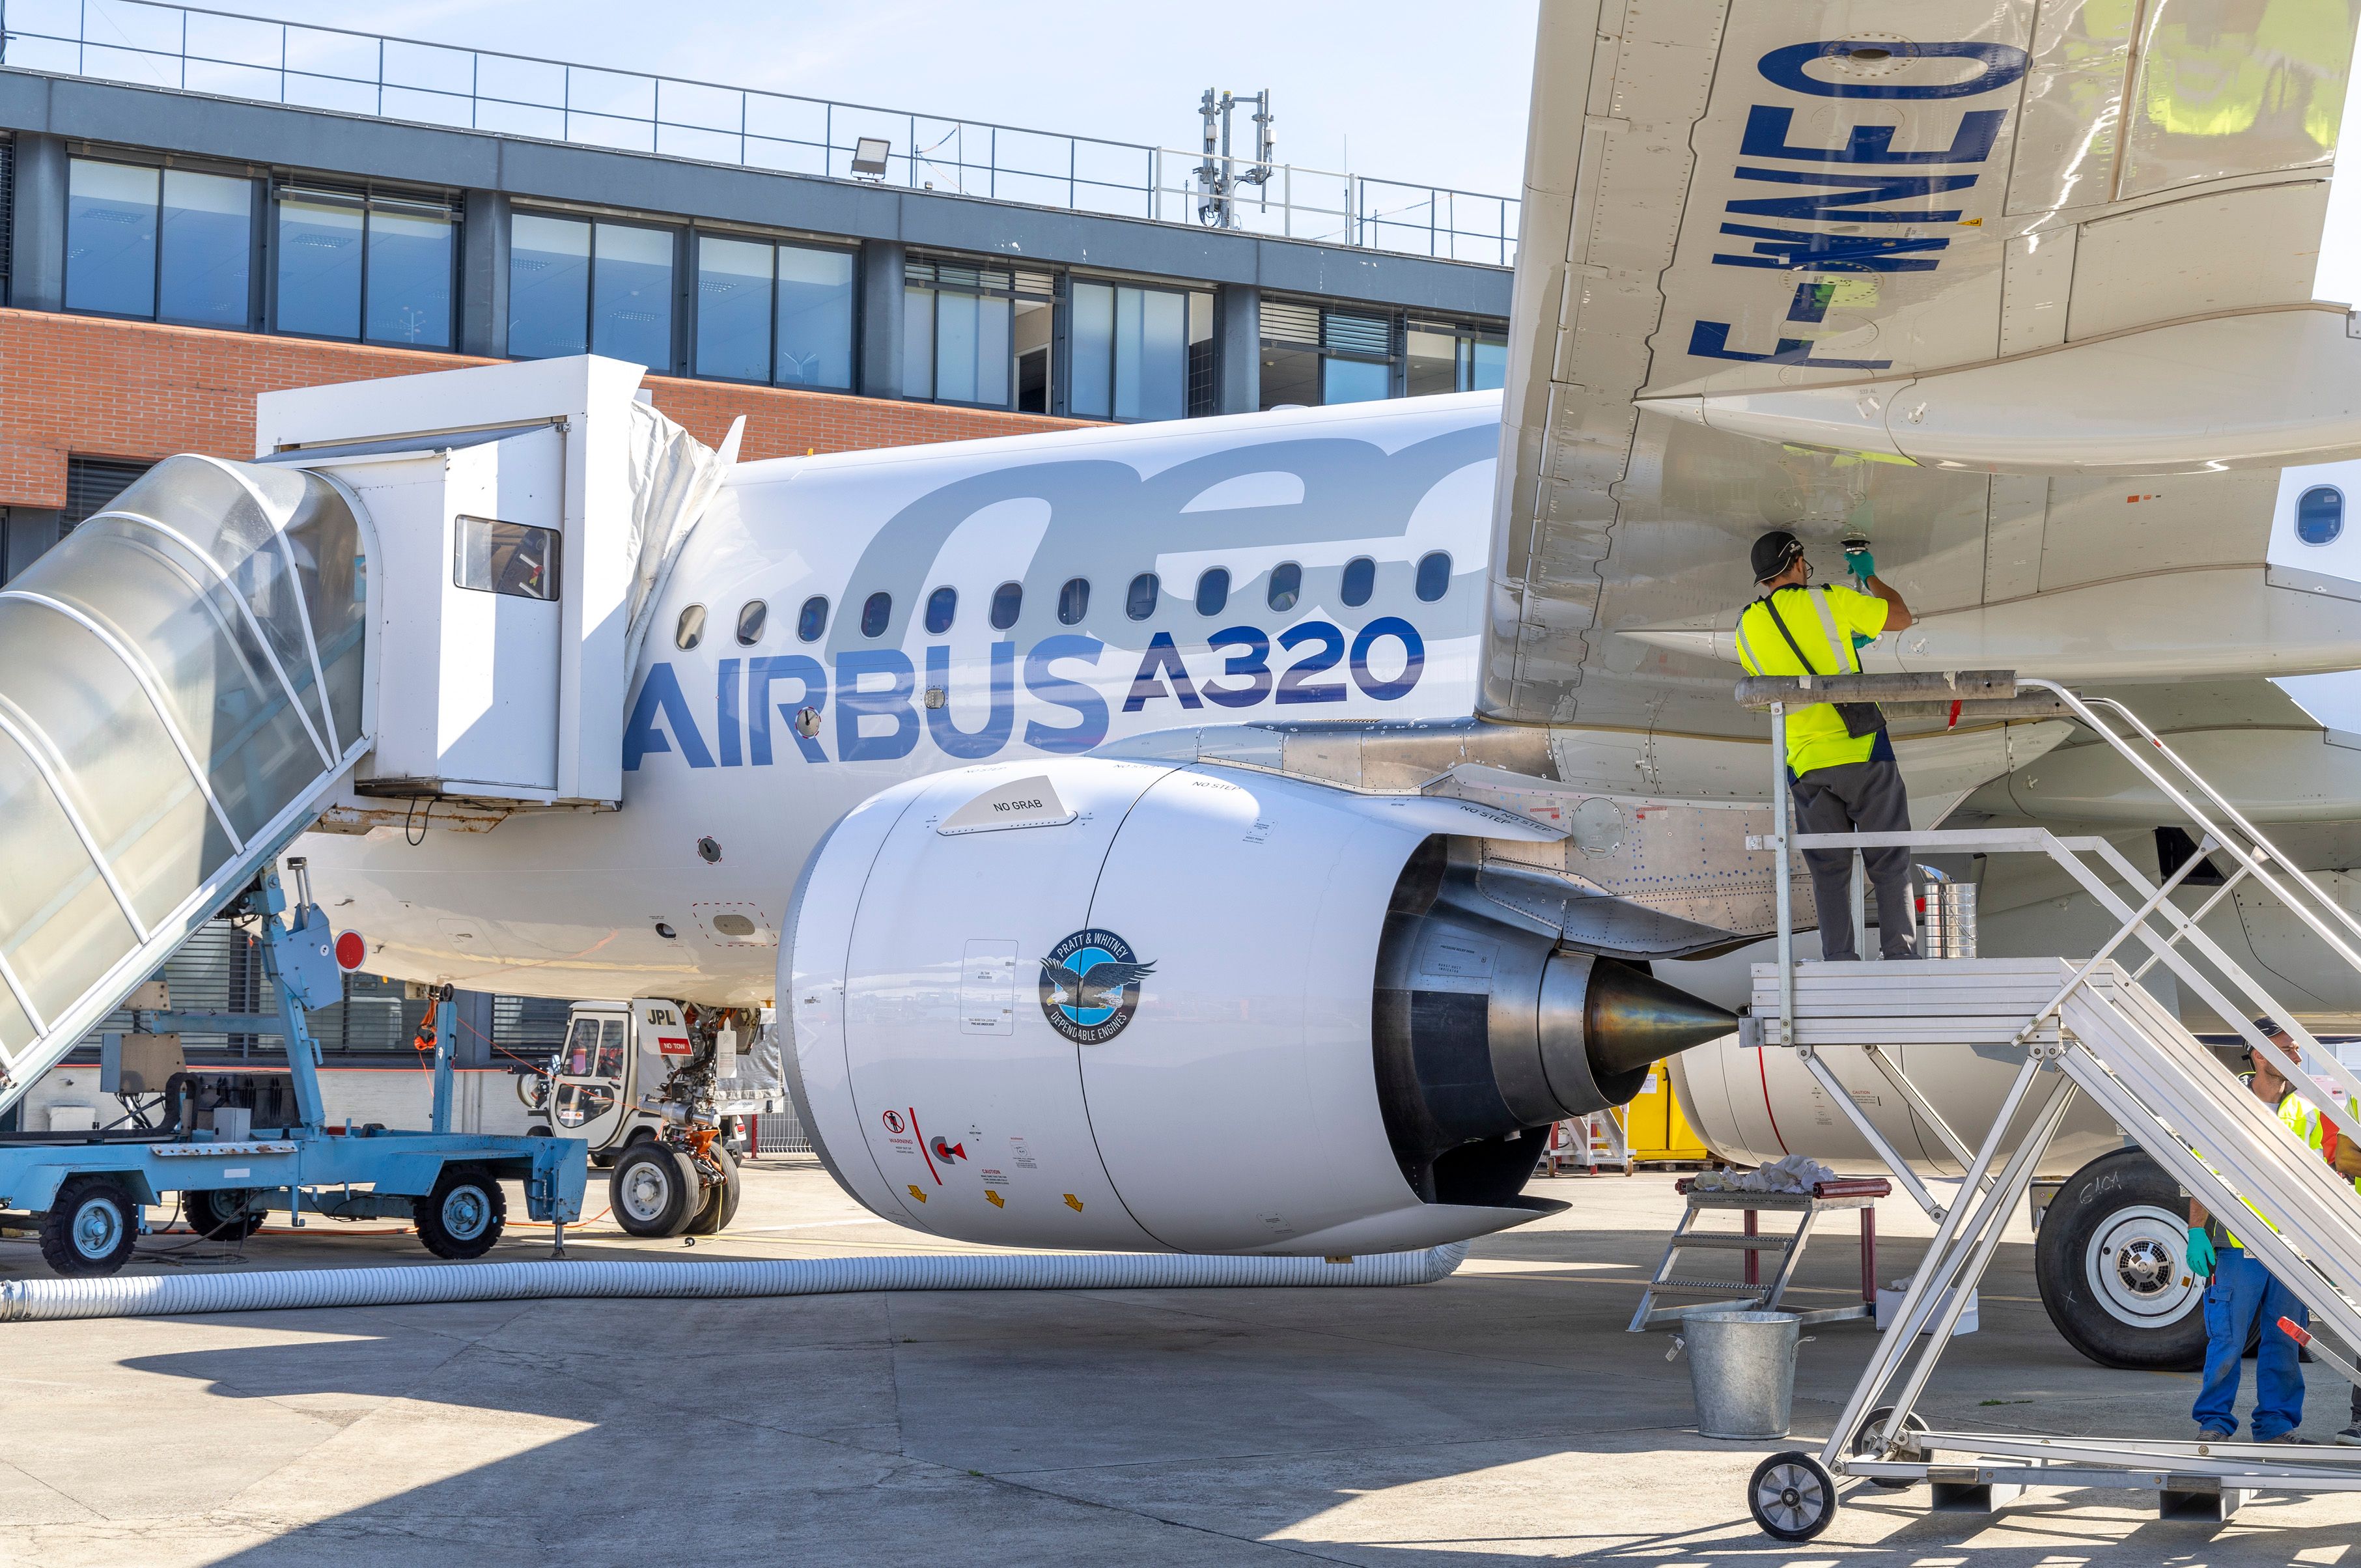 An Airbus A320neo parked at an airport with its engine in full view.